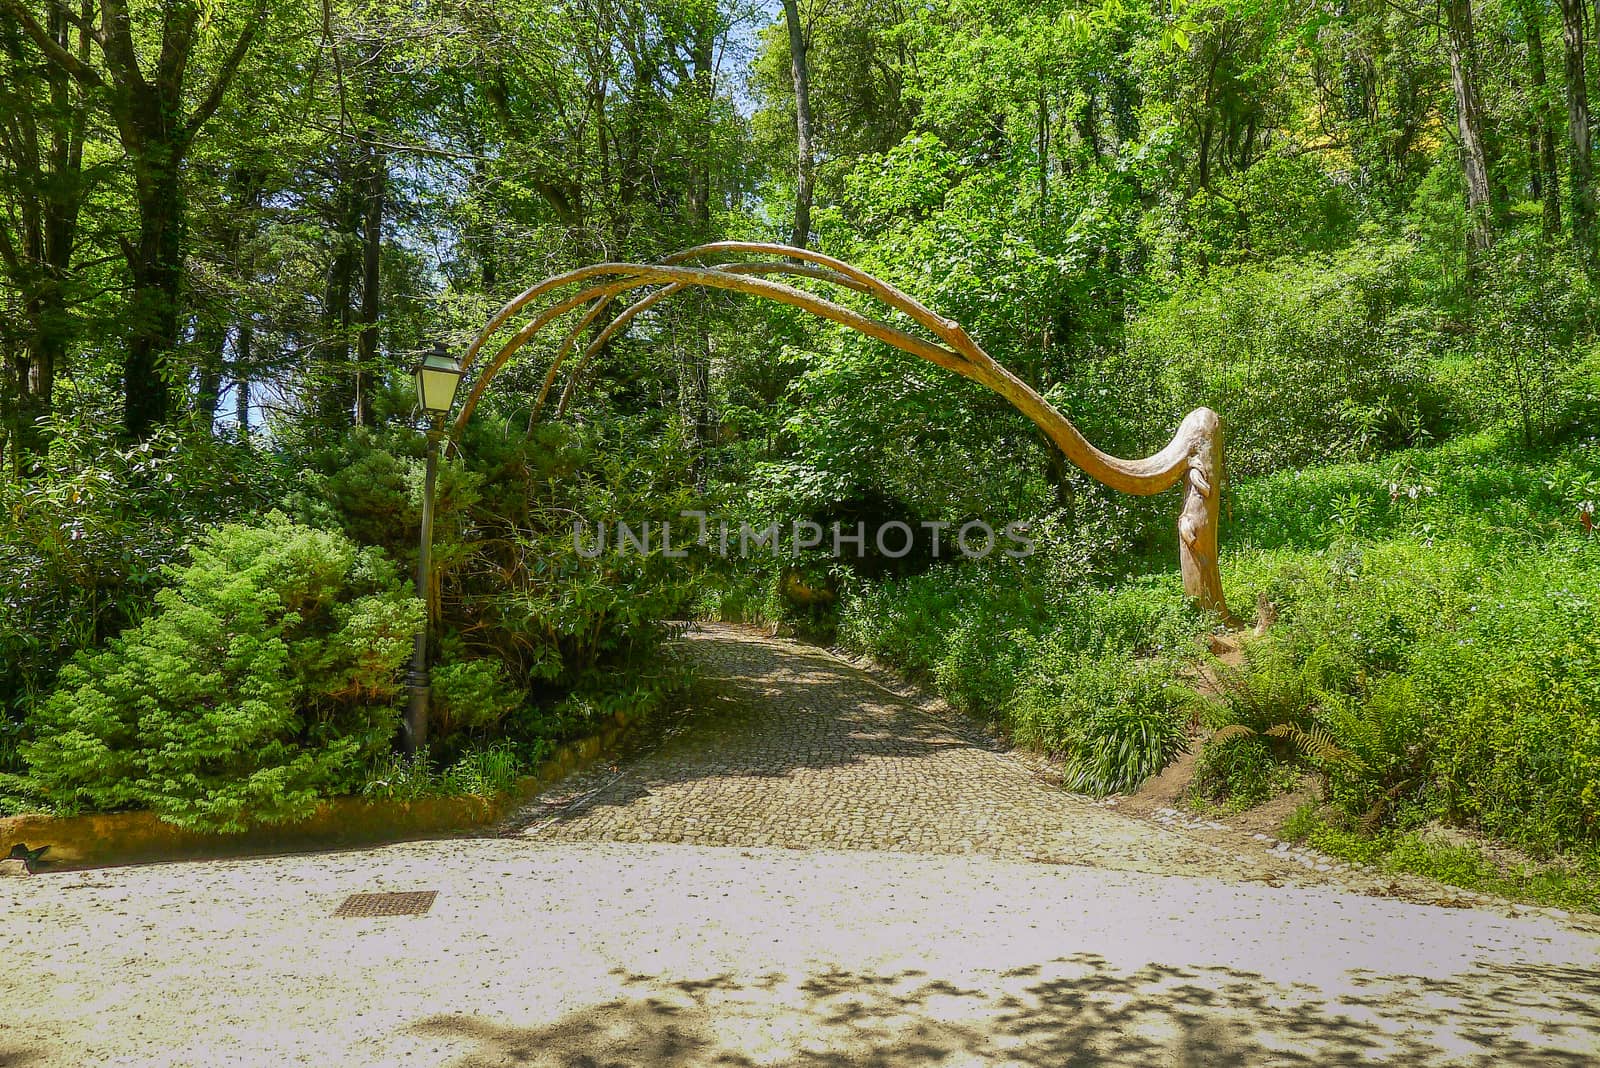 Tree curving round in a park in Sintra Portugal